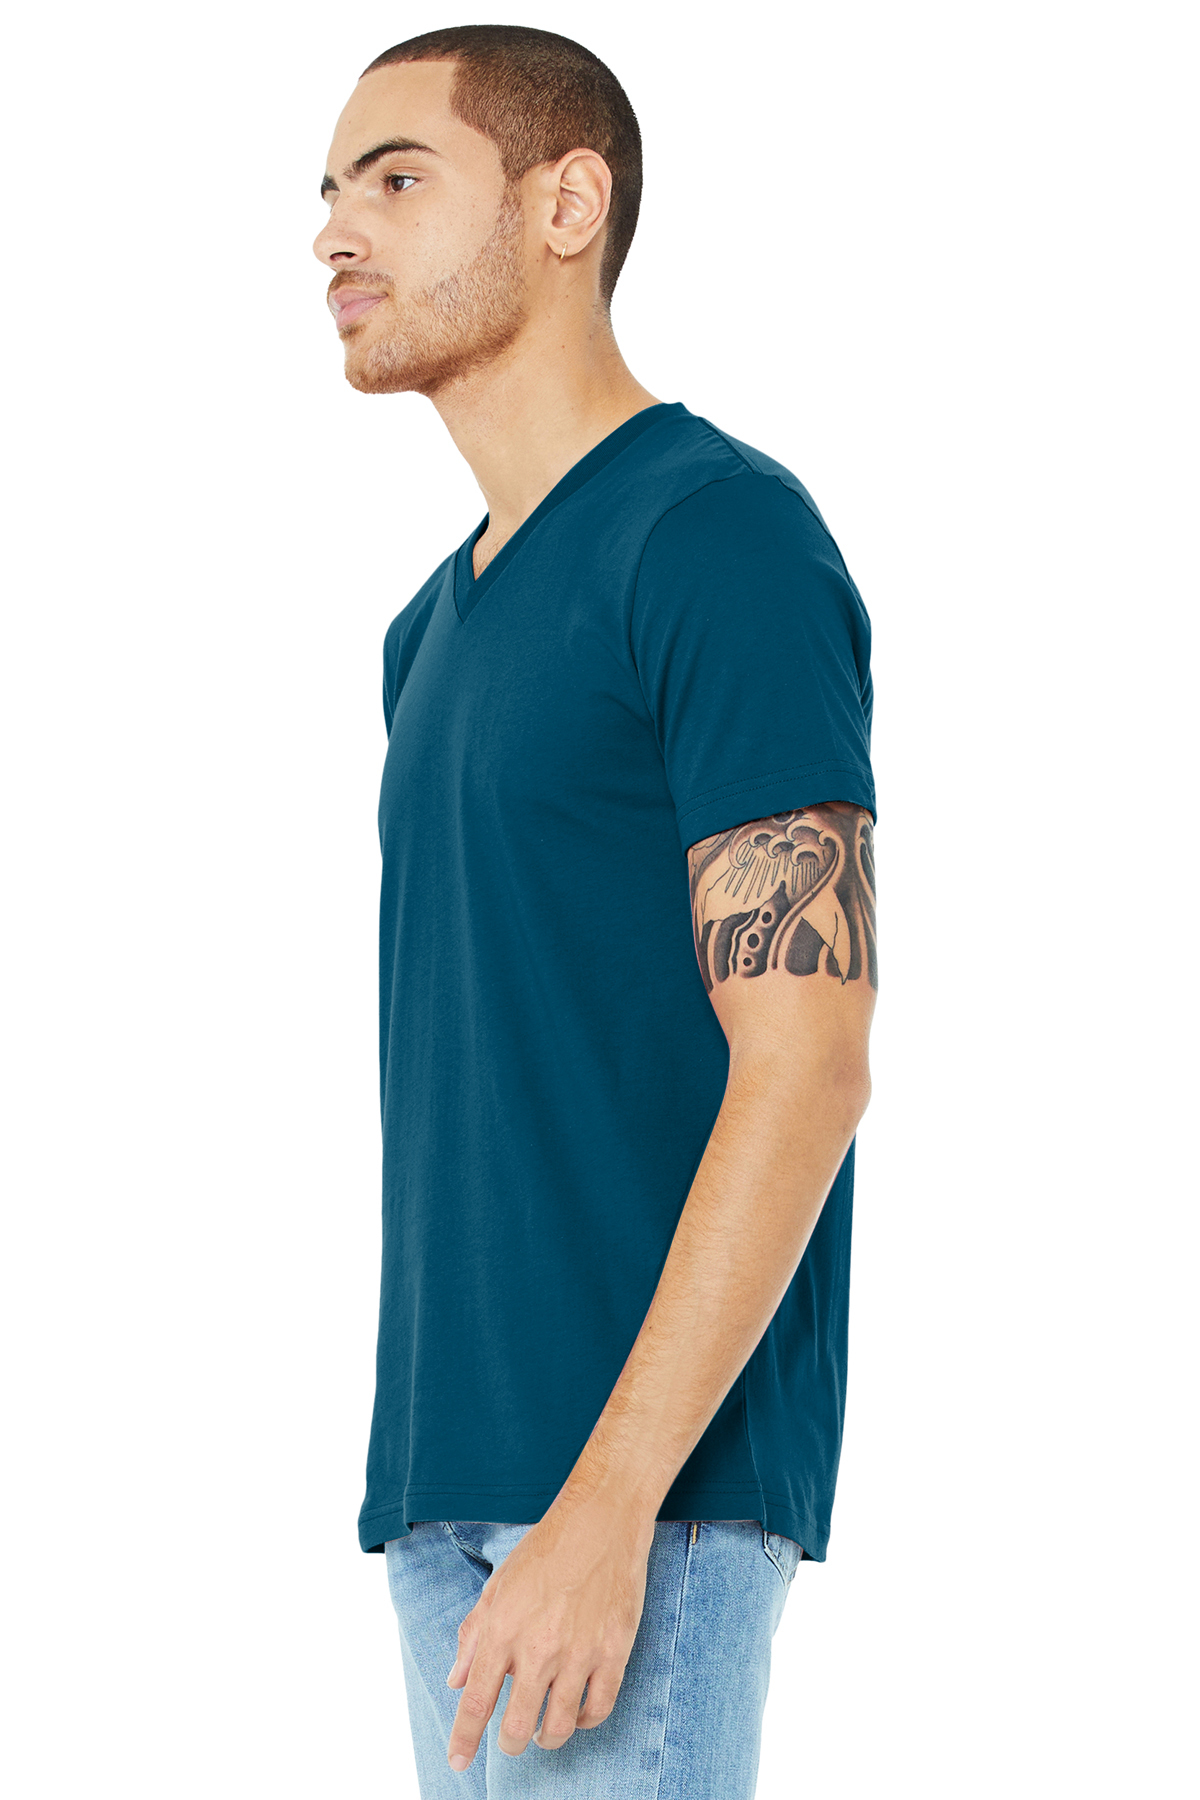 Details about   BC3005 BELLA+CANVAS Unisex Jersey Short Sleeve V-Neck Tee 